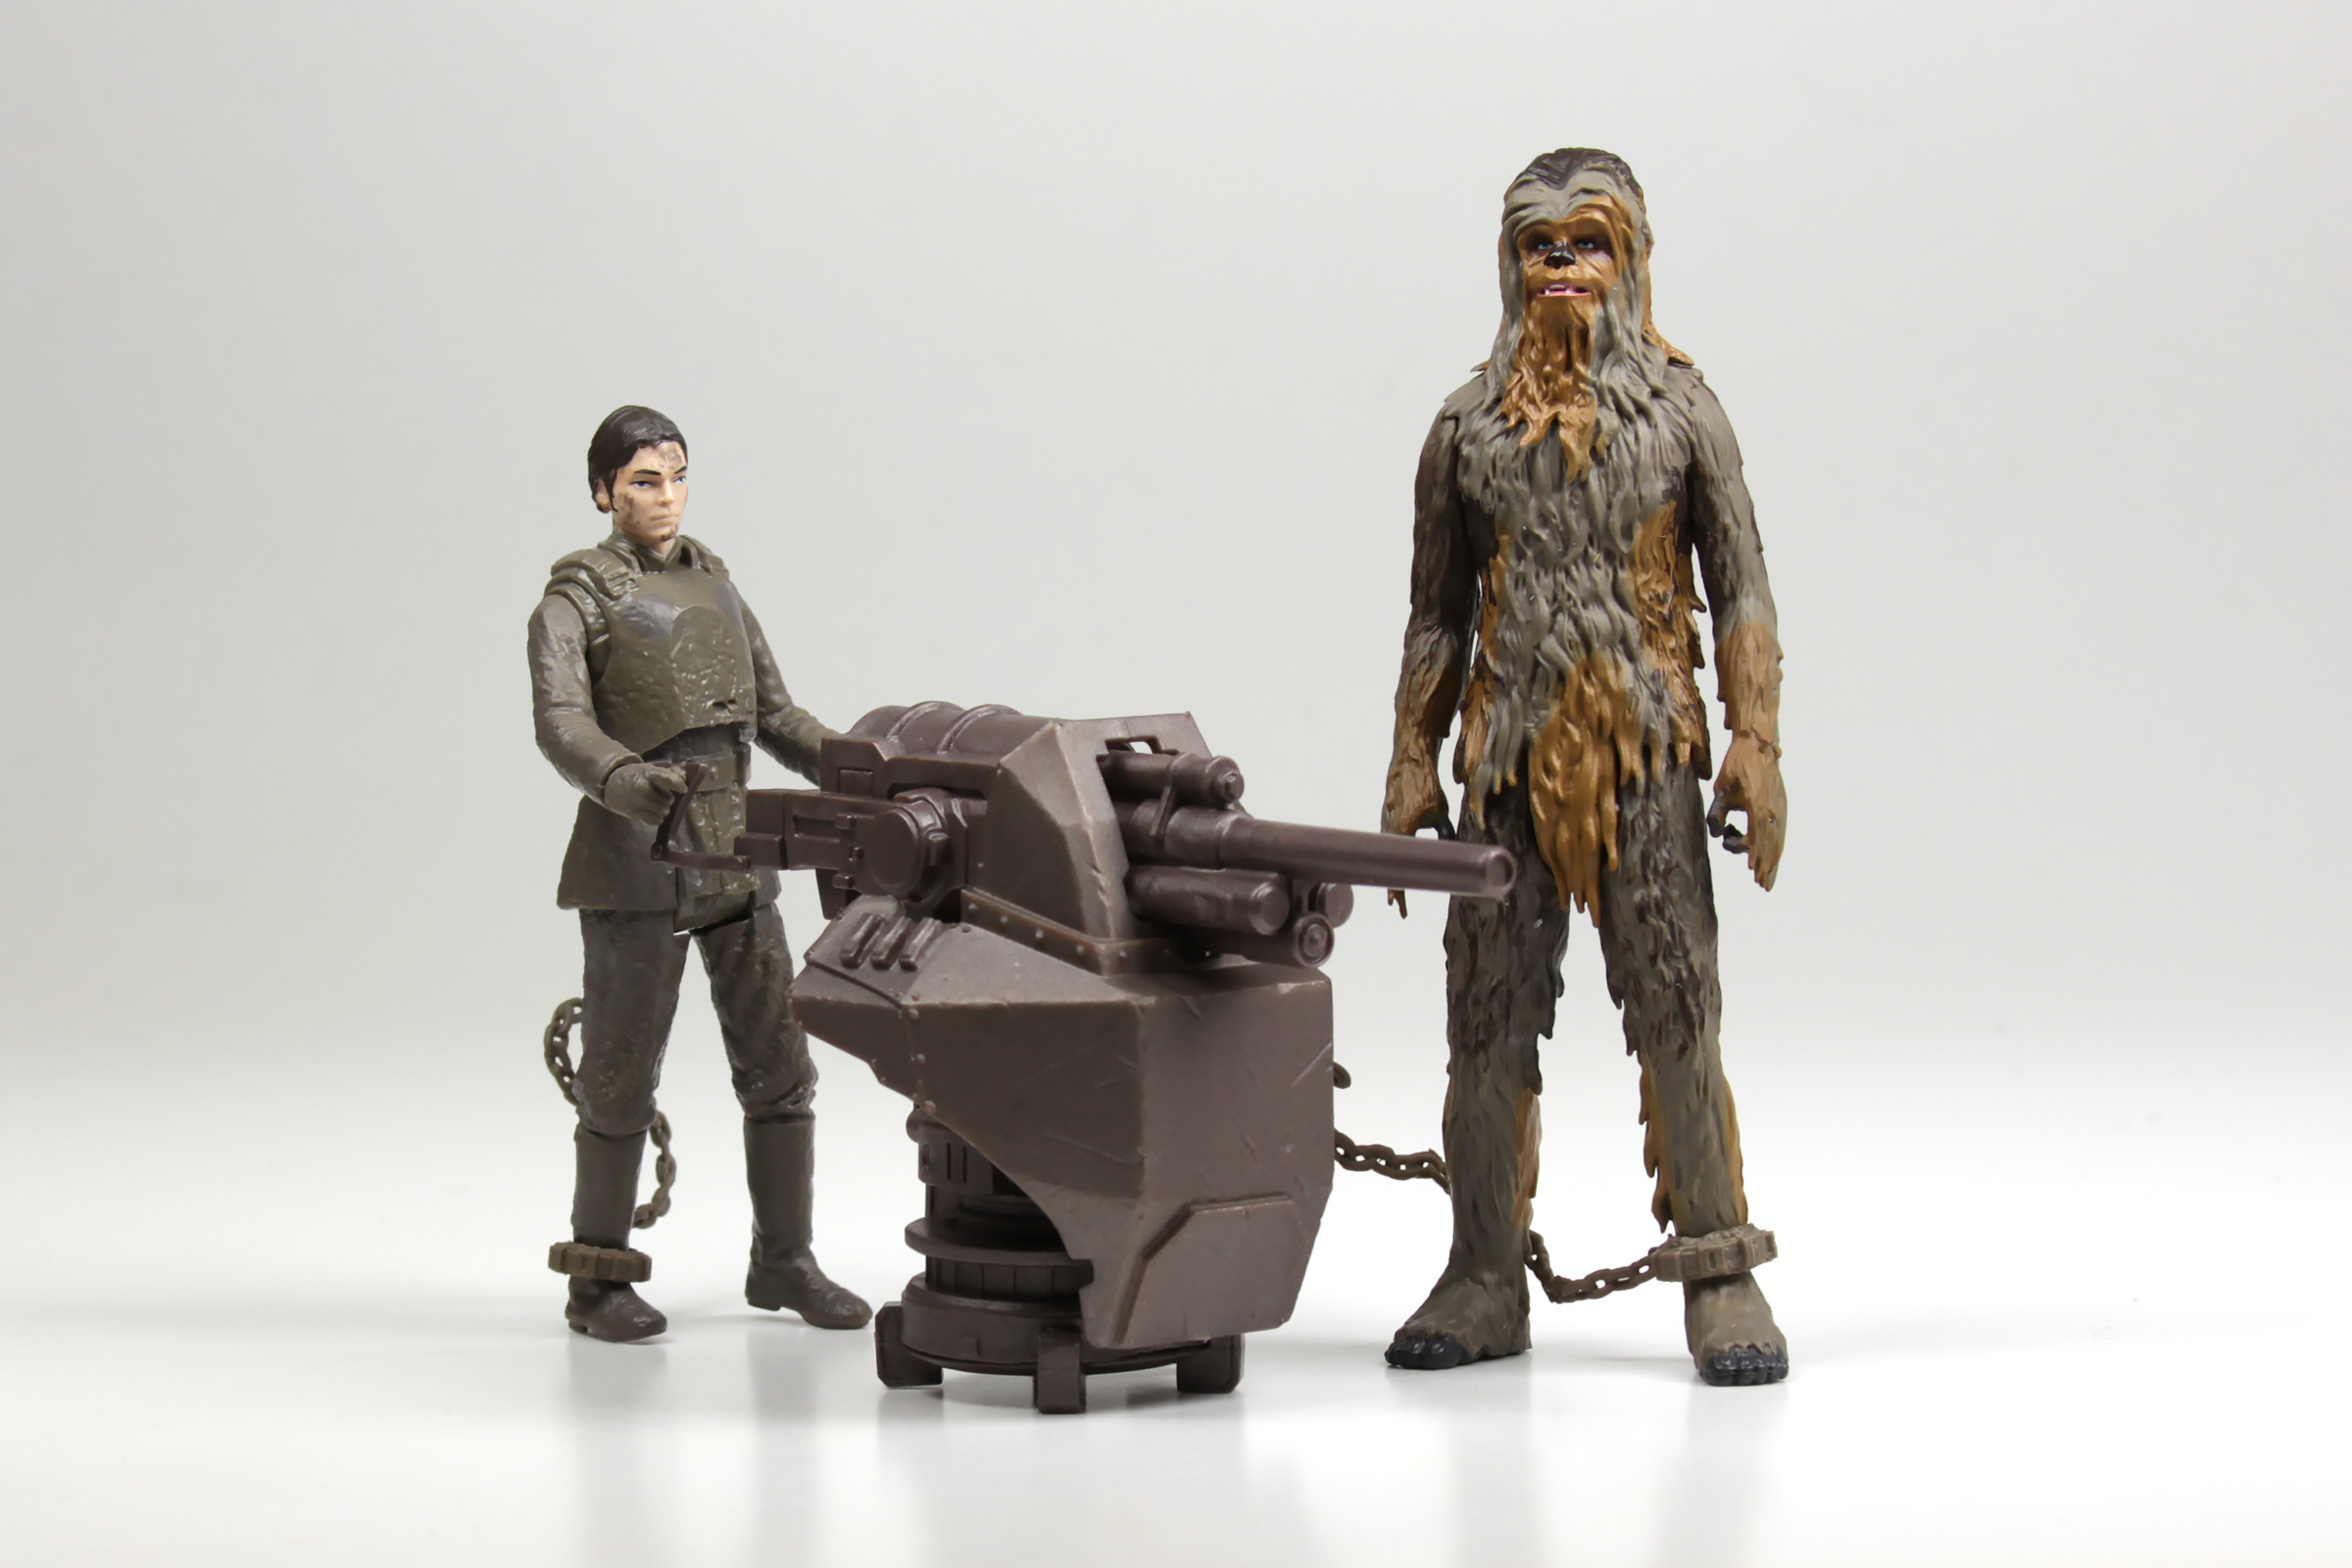 Details about   Star Wars: Solo Chewbacca Mimban Mimban & Han Solo Figure 2-Pack 3.75 Inch